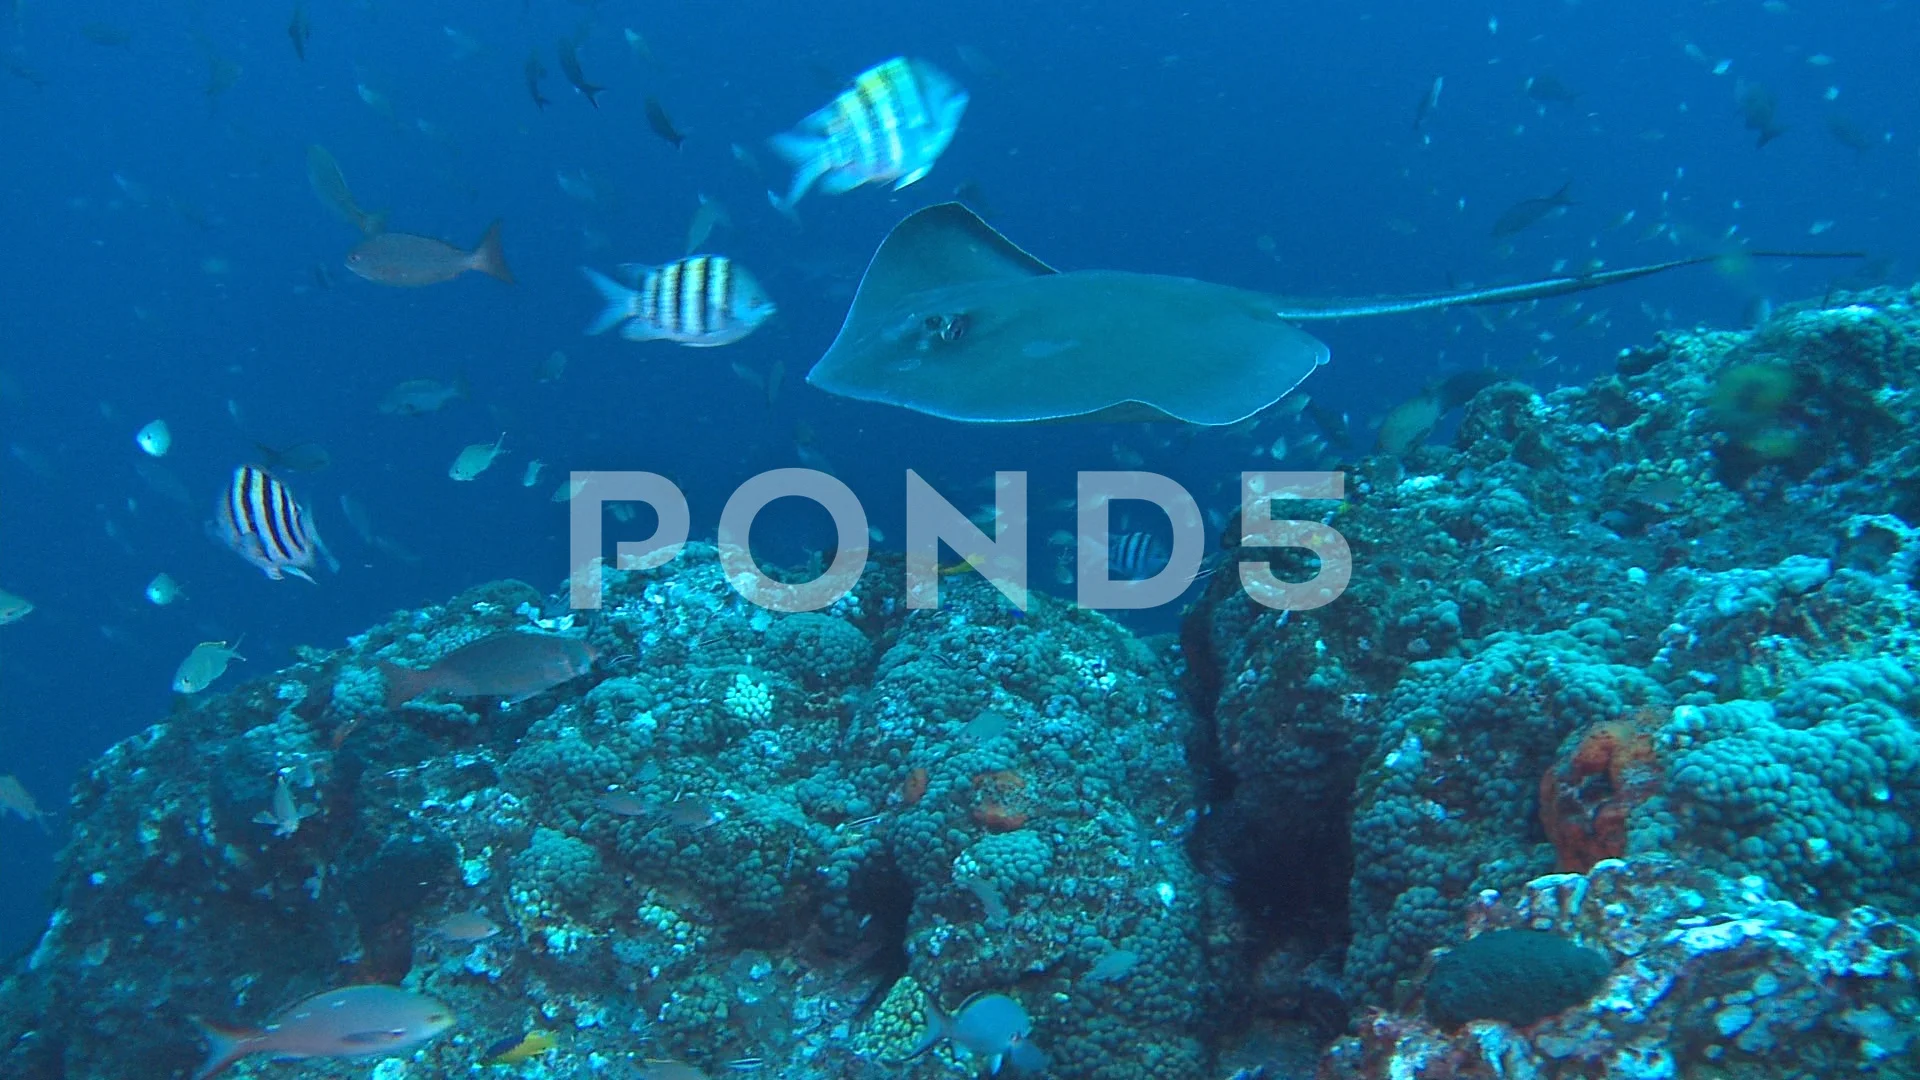 Sting Ray Swims Over Coral Reef With Fish Swimming On Reef Video Images, Photos, Reviews